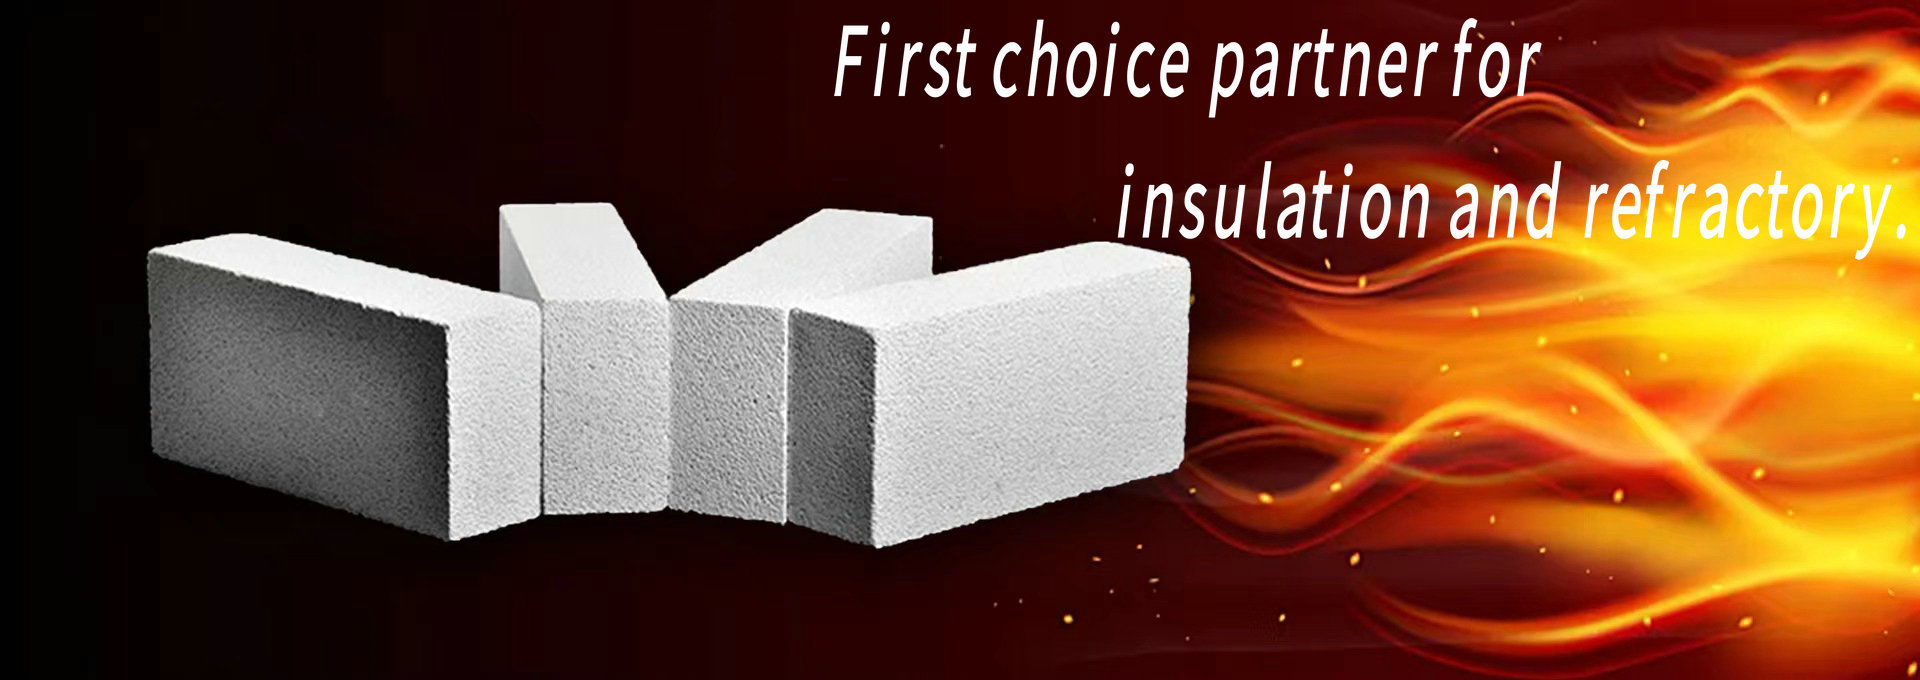 First choice partner for insulation and refractory.